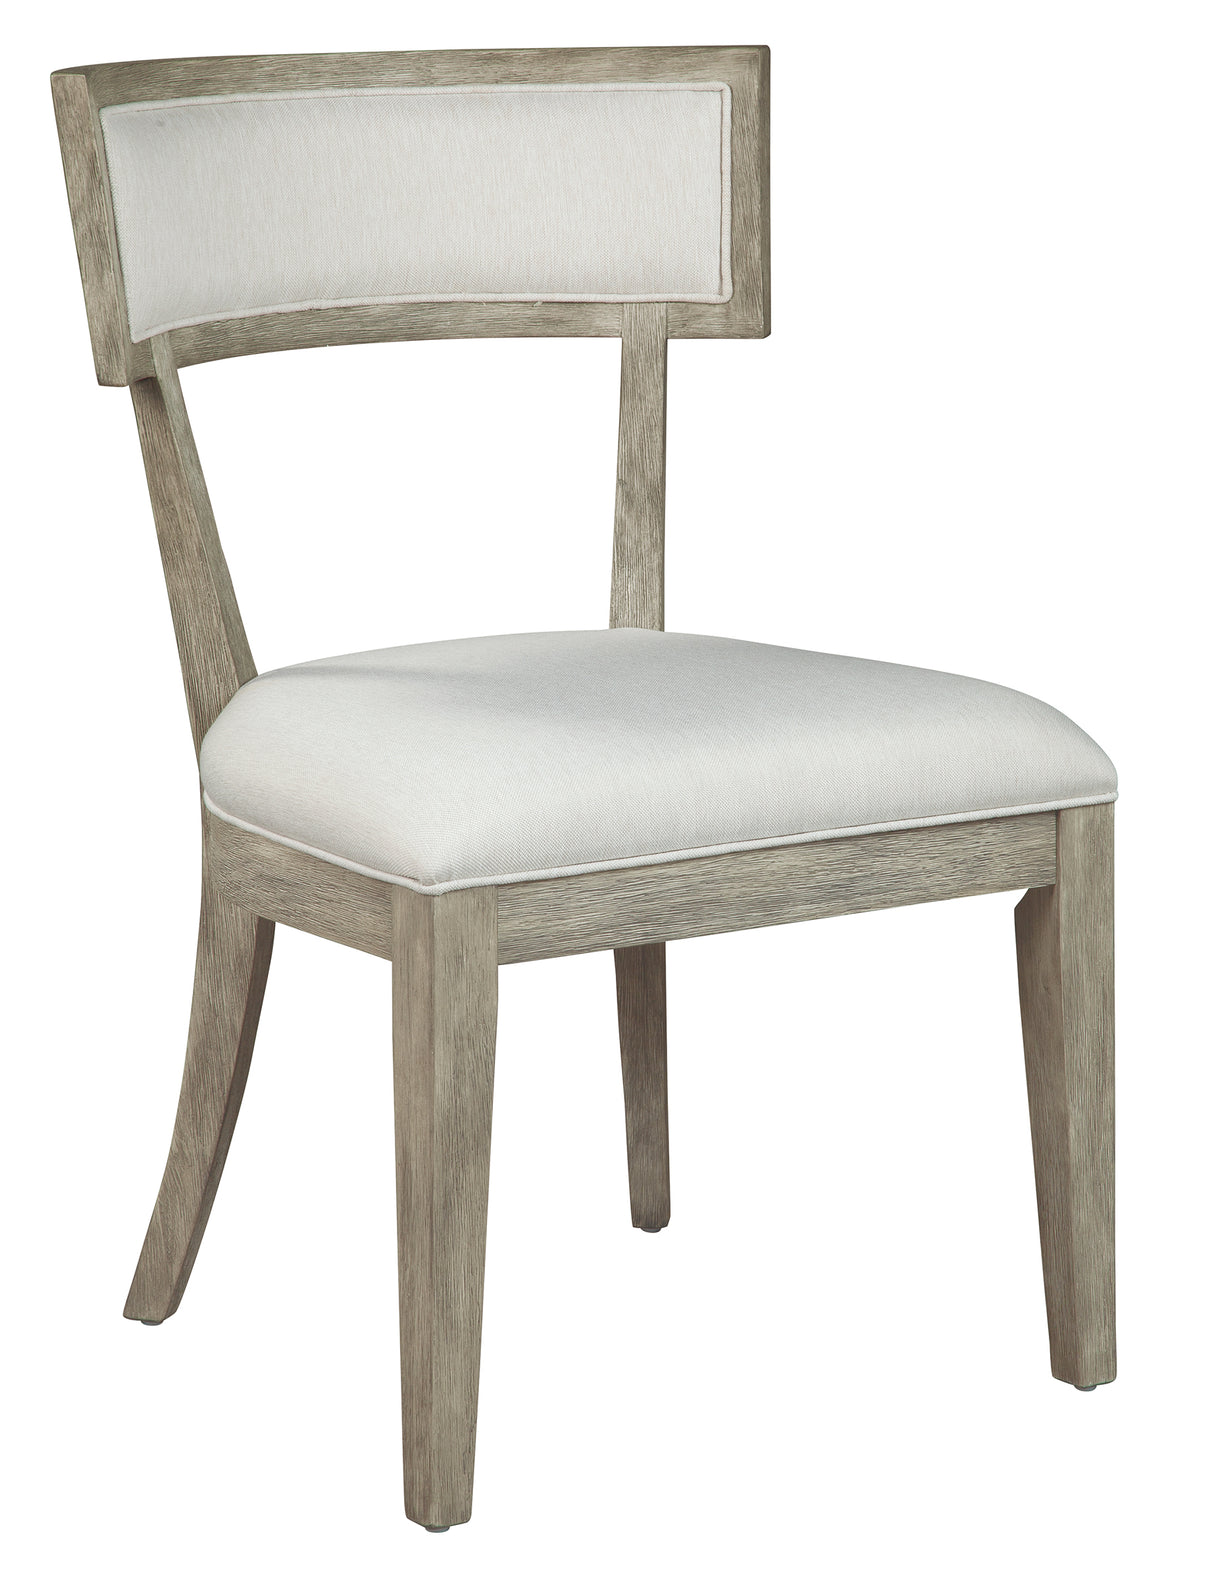 Hekman 24923 Bedford Park 22in. x 24.5in. x 35.75in. Dining Side Chair